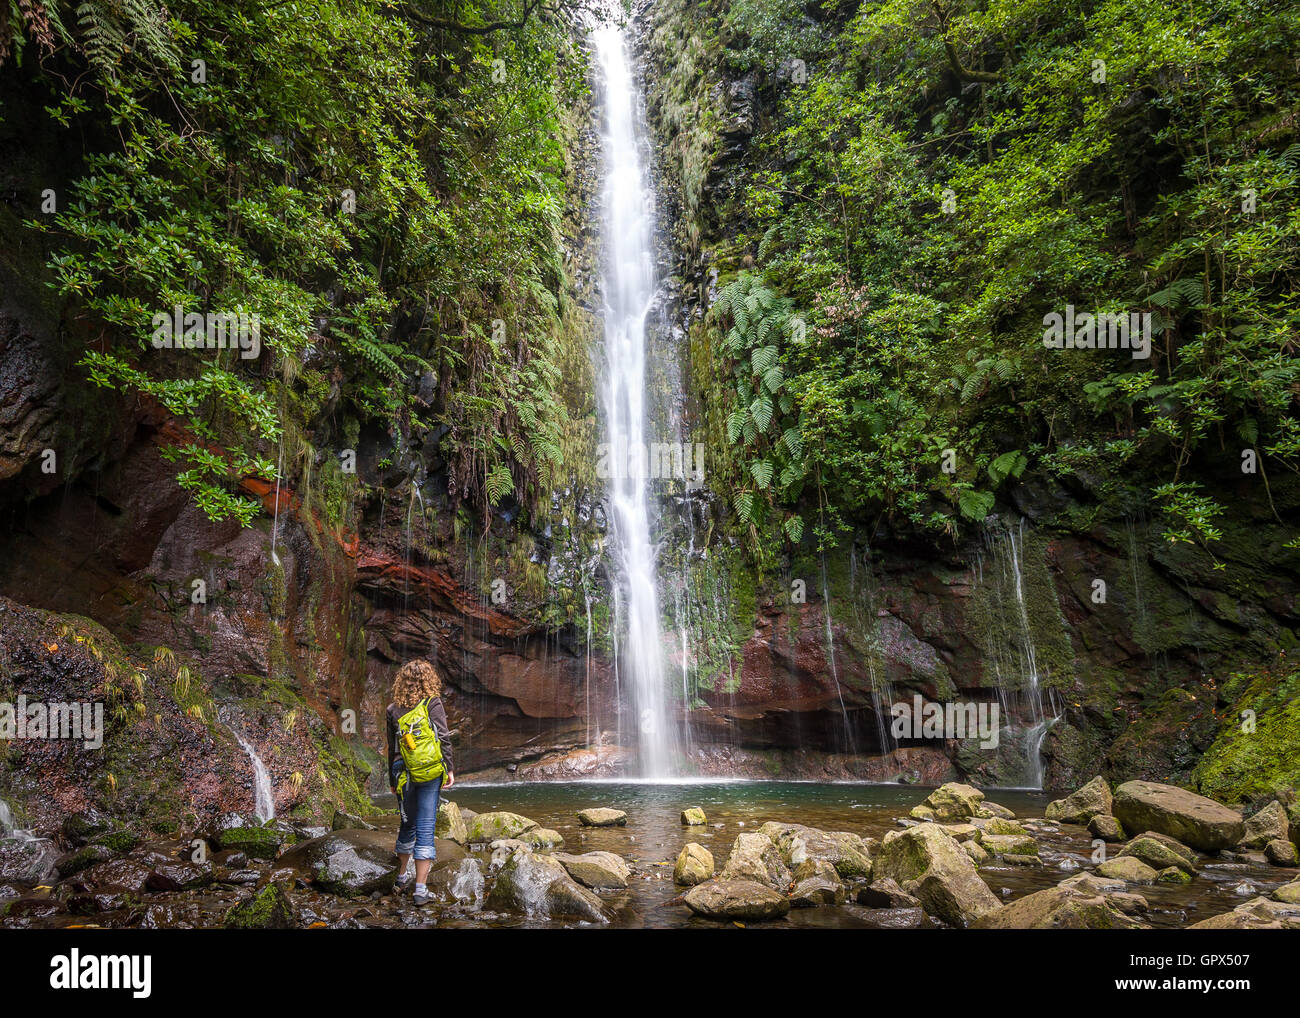 Big waterfall and woman hiker at levada 25 fountains in Rabacal, Madeira island Stock Photo